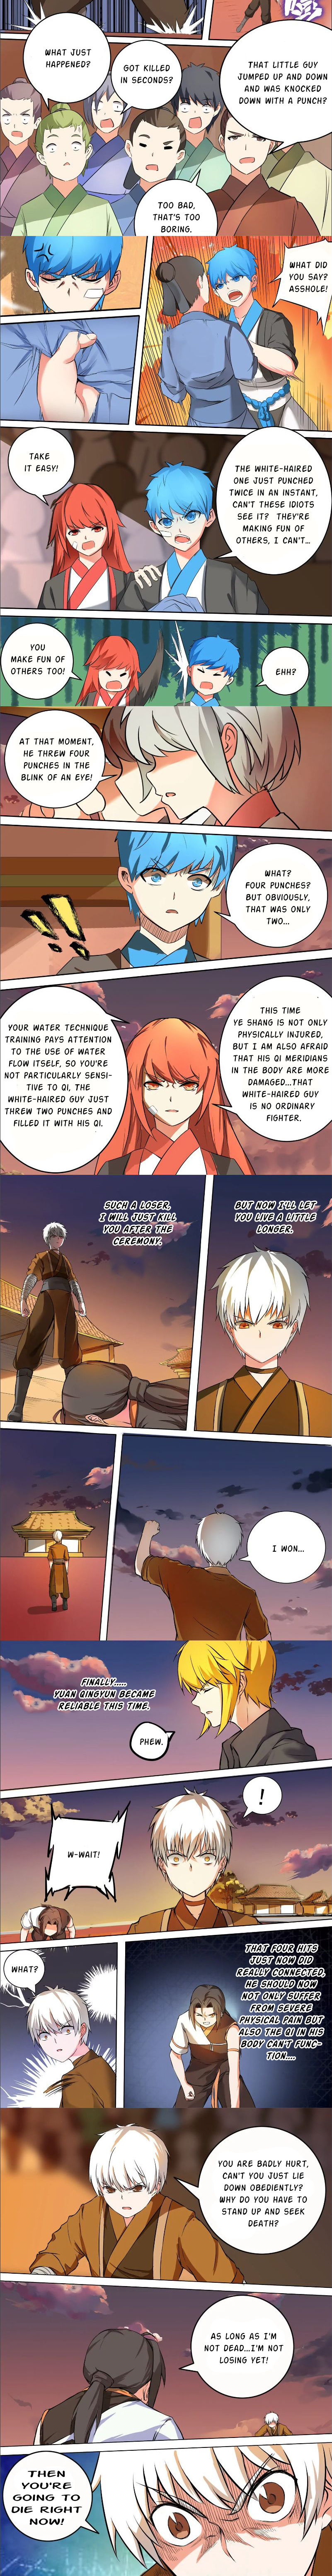 Ten Thousand Paths To Becoming A God - Page 3